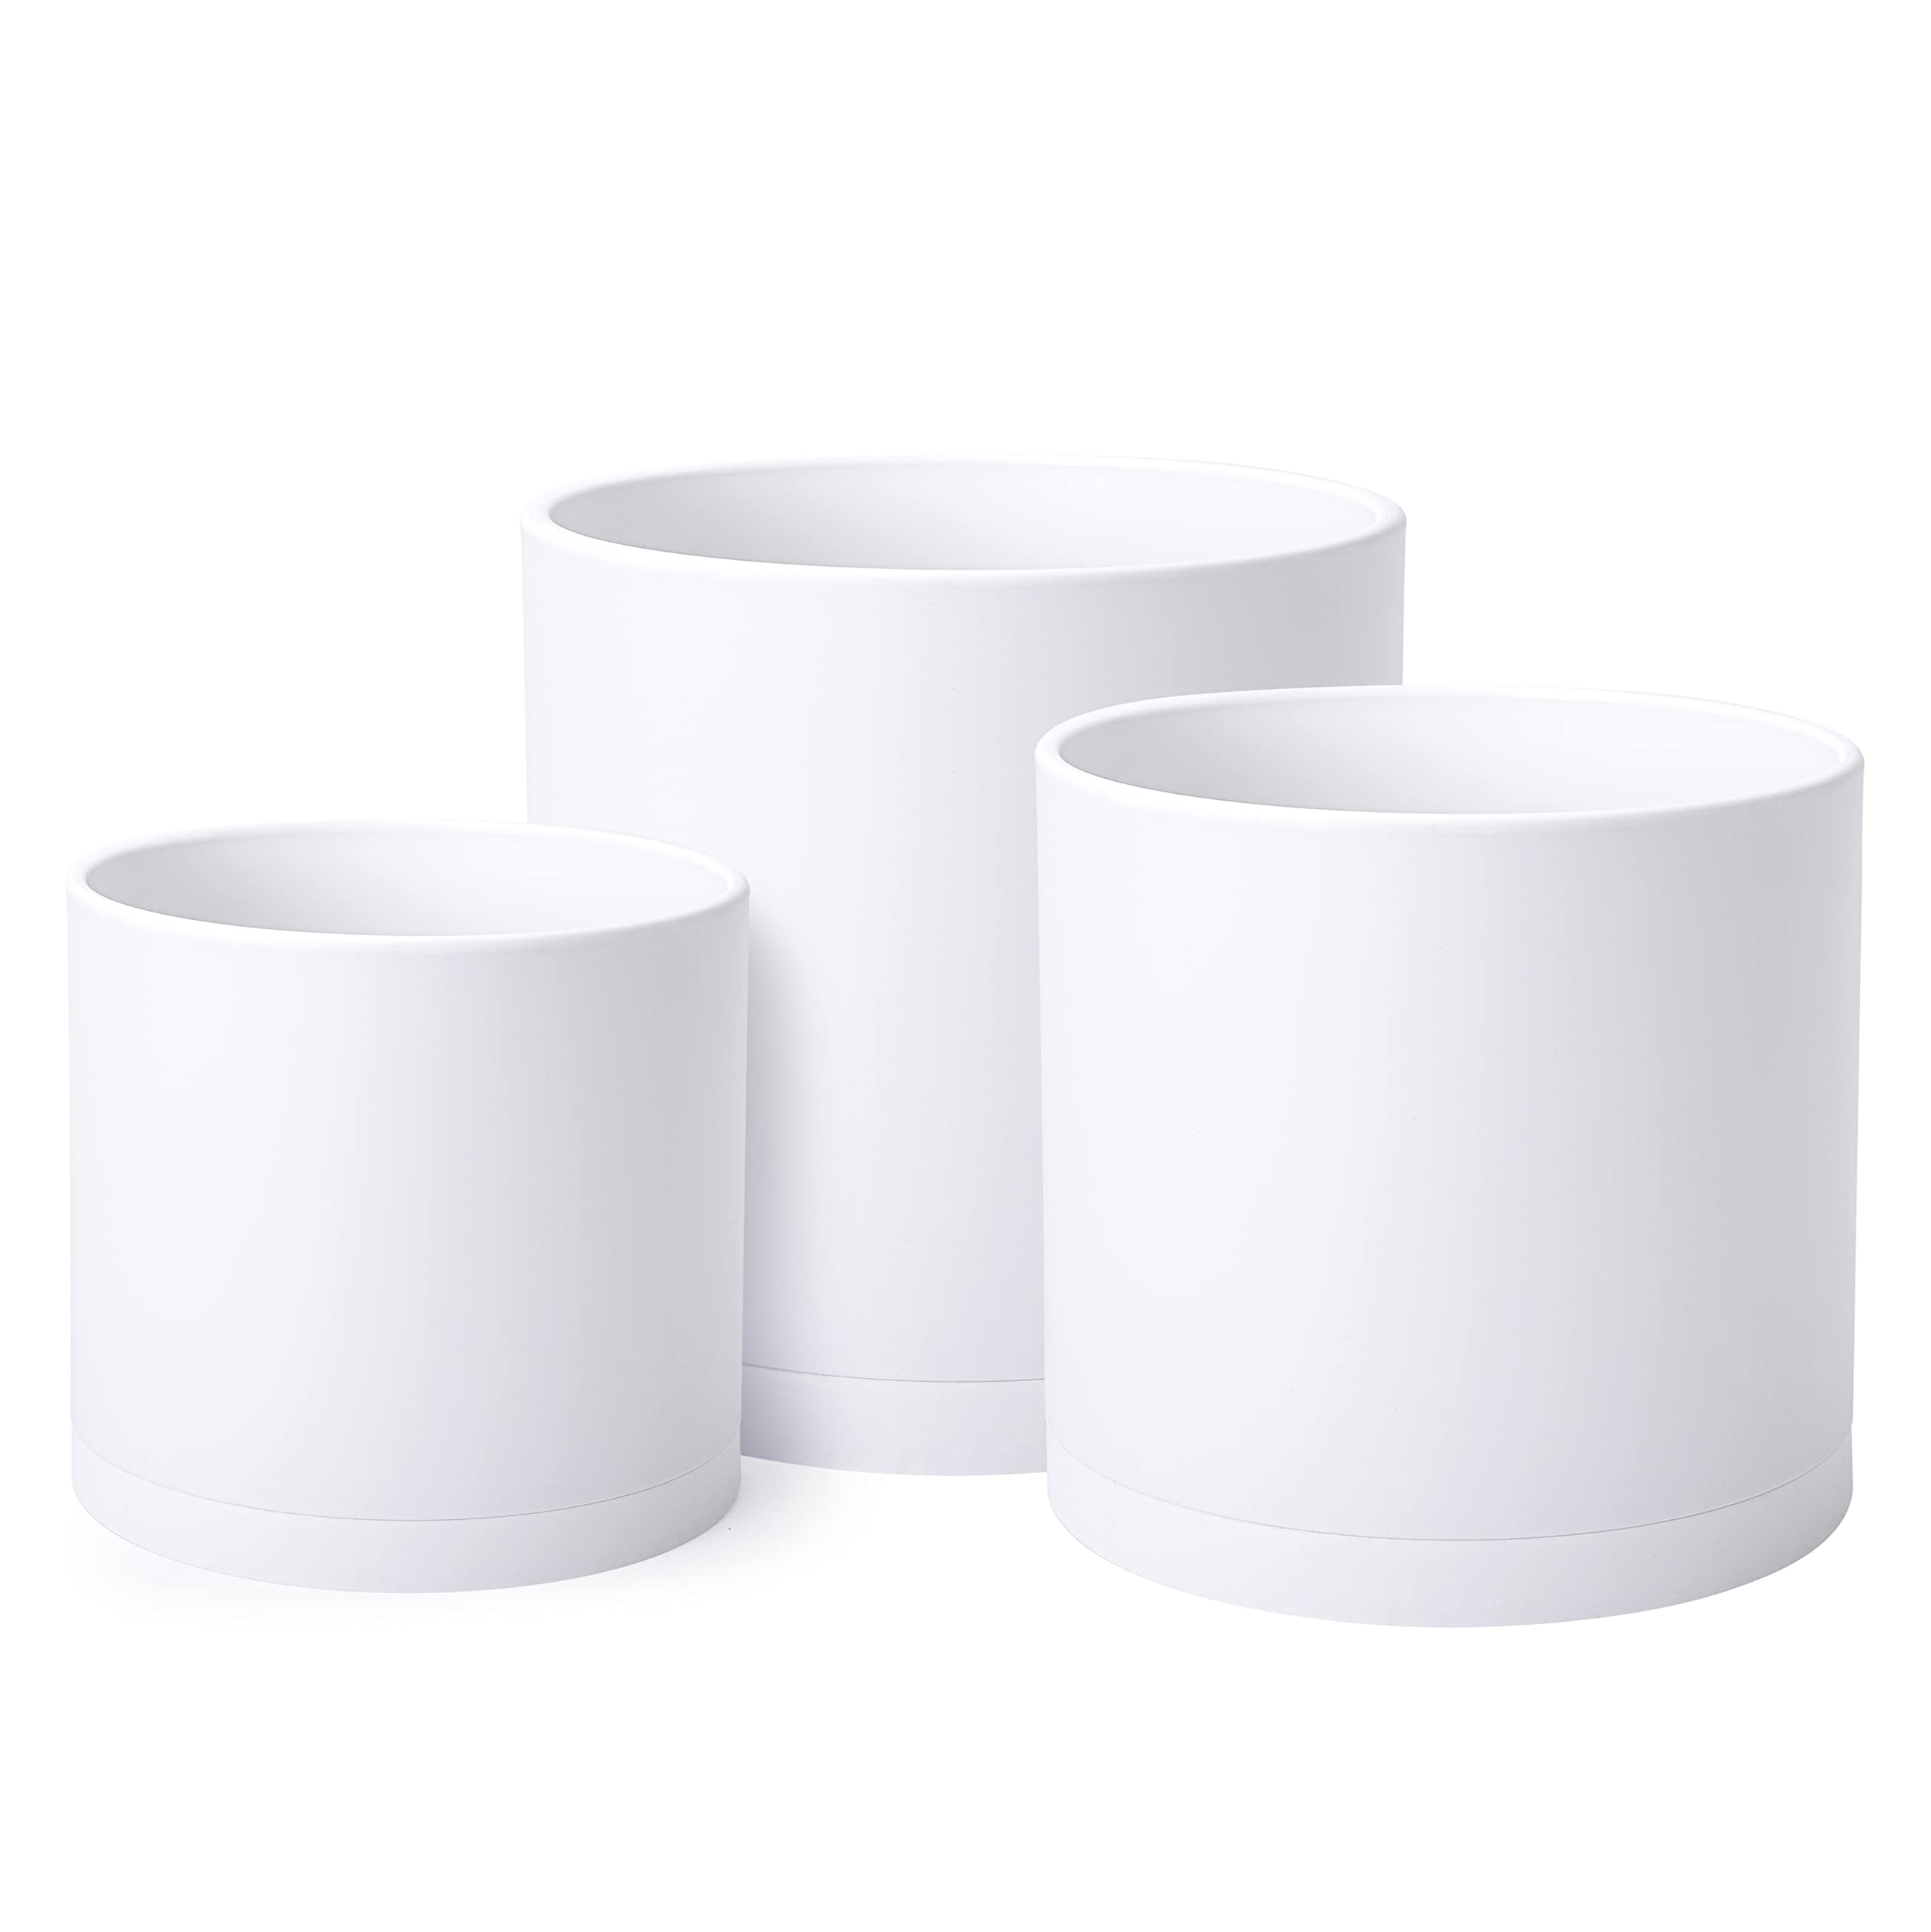 Dev 8 Inch 10 Inch 12 Inch, Set of 3 Plastic Planter Pots for Plants with Drainage Hole and Seamless Saucers, White Color, X-Large, 74-E-XL-1 Massage Lab